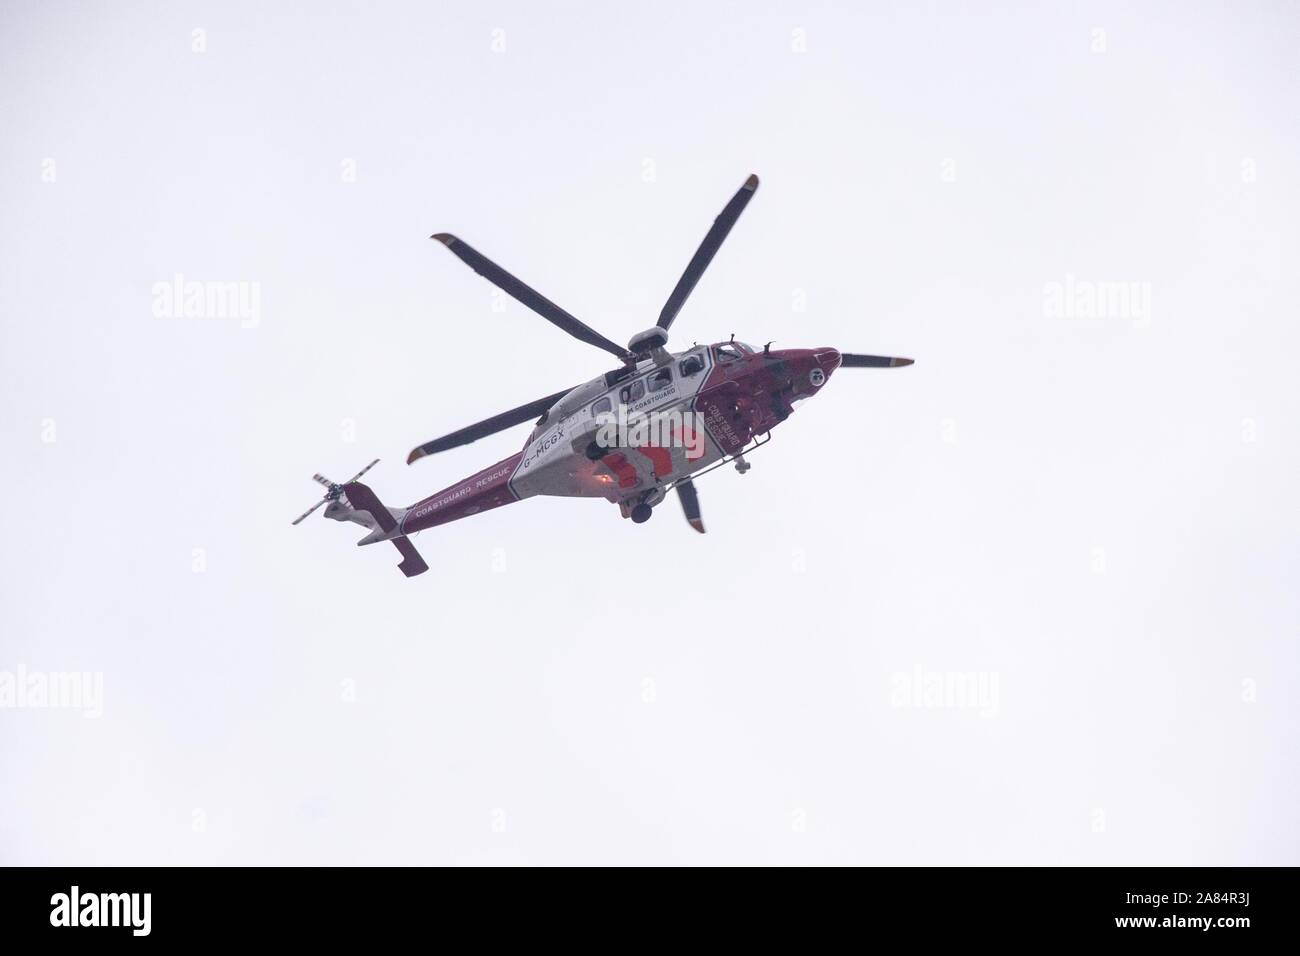 Sidmouth, Devon, 6th Nov 2019 The Coastguard helicopter attends an incident where a car was reportedly driven over a cliff at a remote spot to the west of the seaside town. Photo Central/Alamy Live News Stock Photo